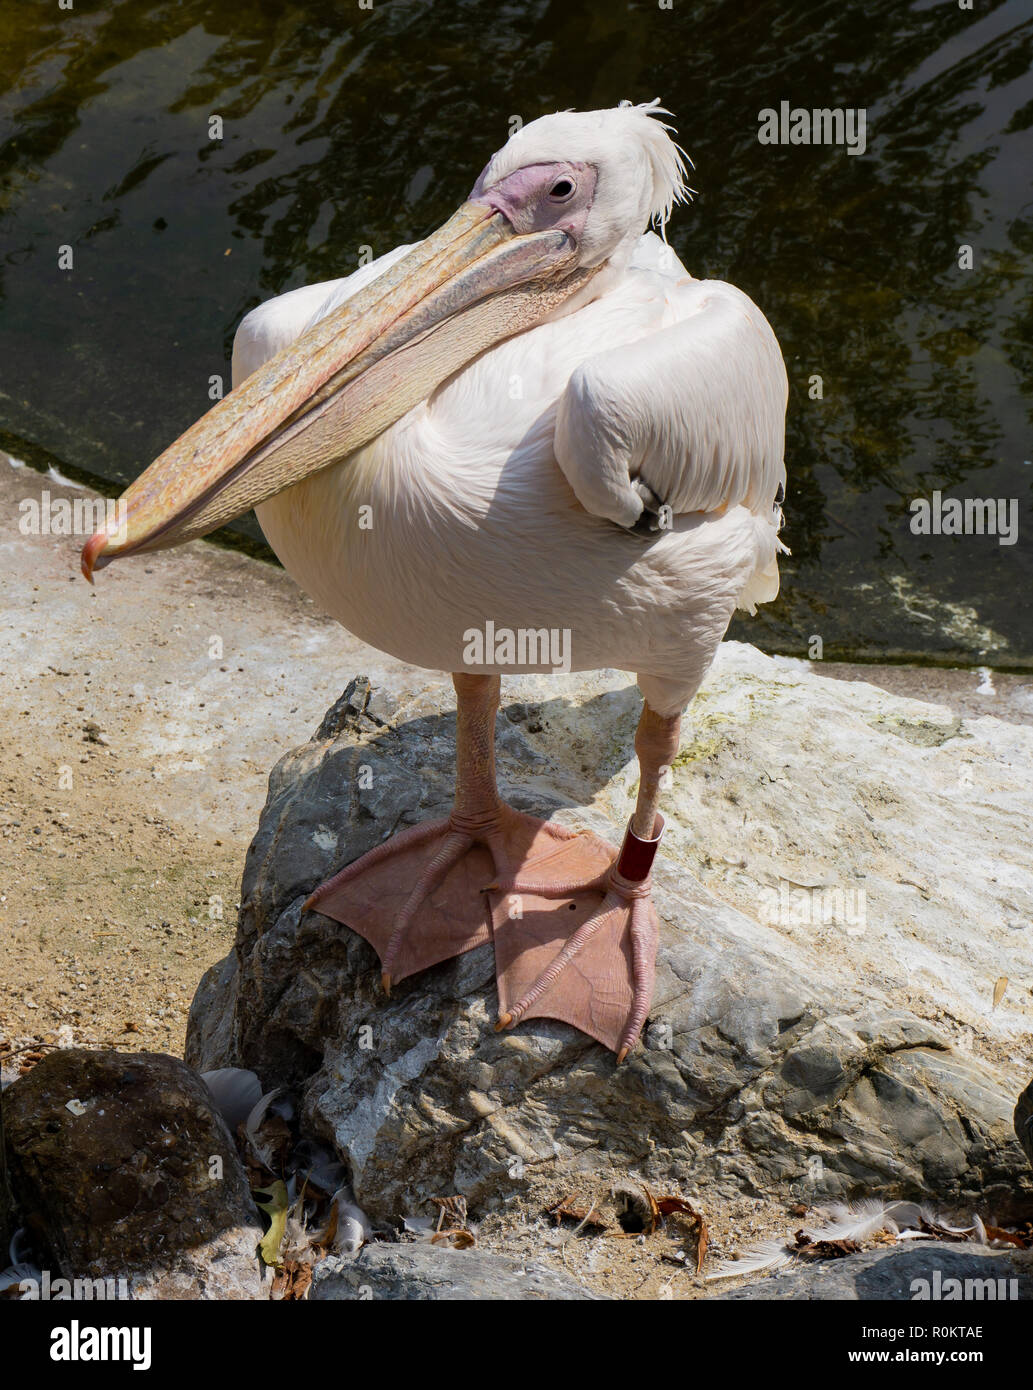 Disappointed BREXIT voter. Comedy wildlife. Pelican standing on rock looking like a grumpy old man. Anthropomorphism. Stock Photo